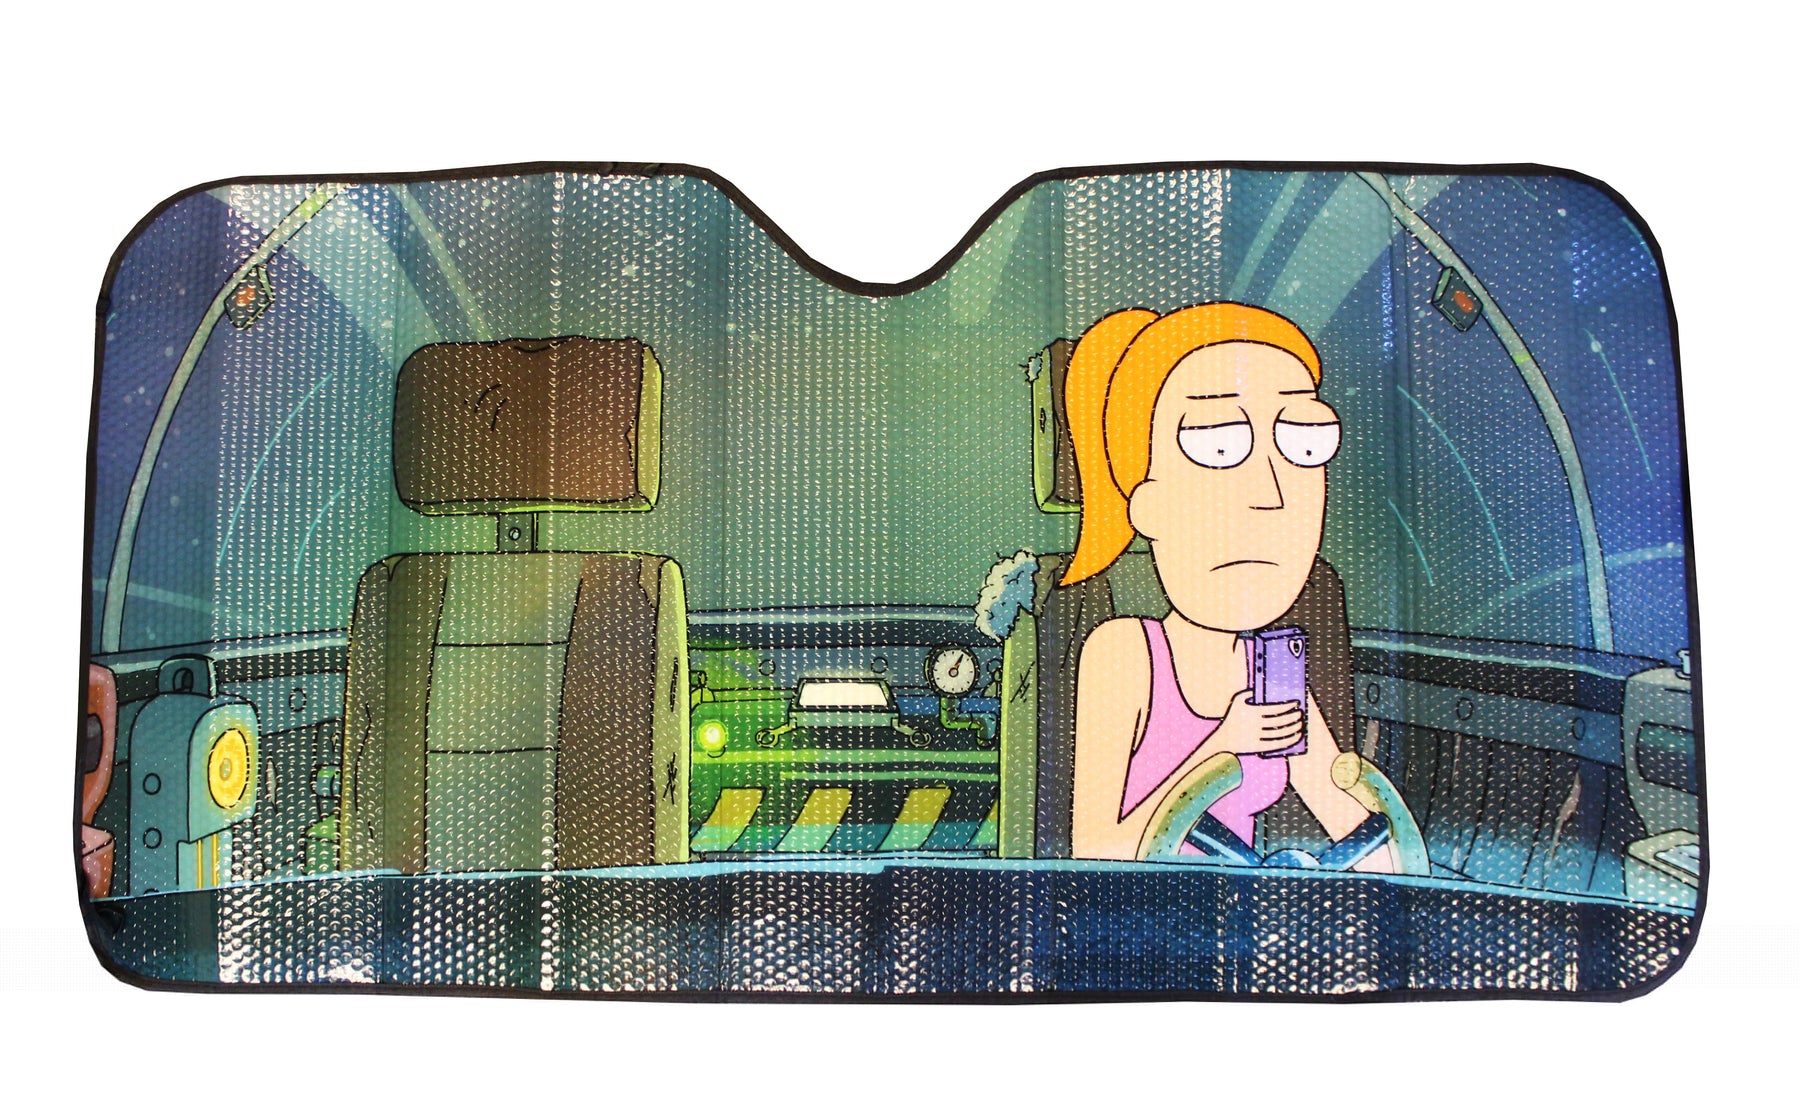 Rick and Morty Foldable Universal Windshield Sun Shade for Car Suv Truck